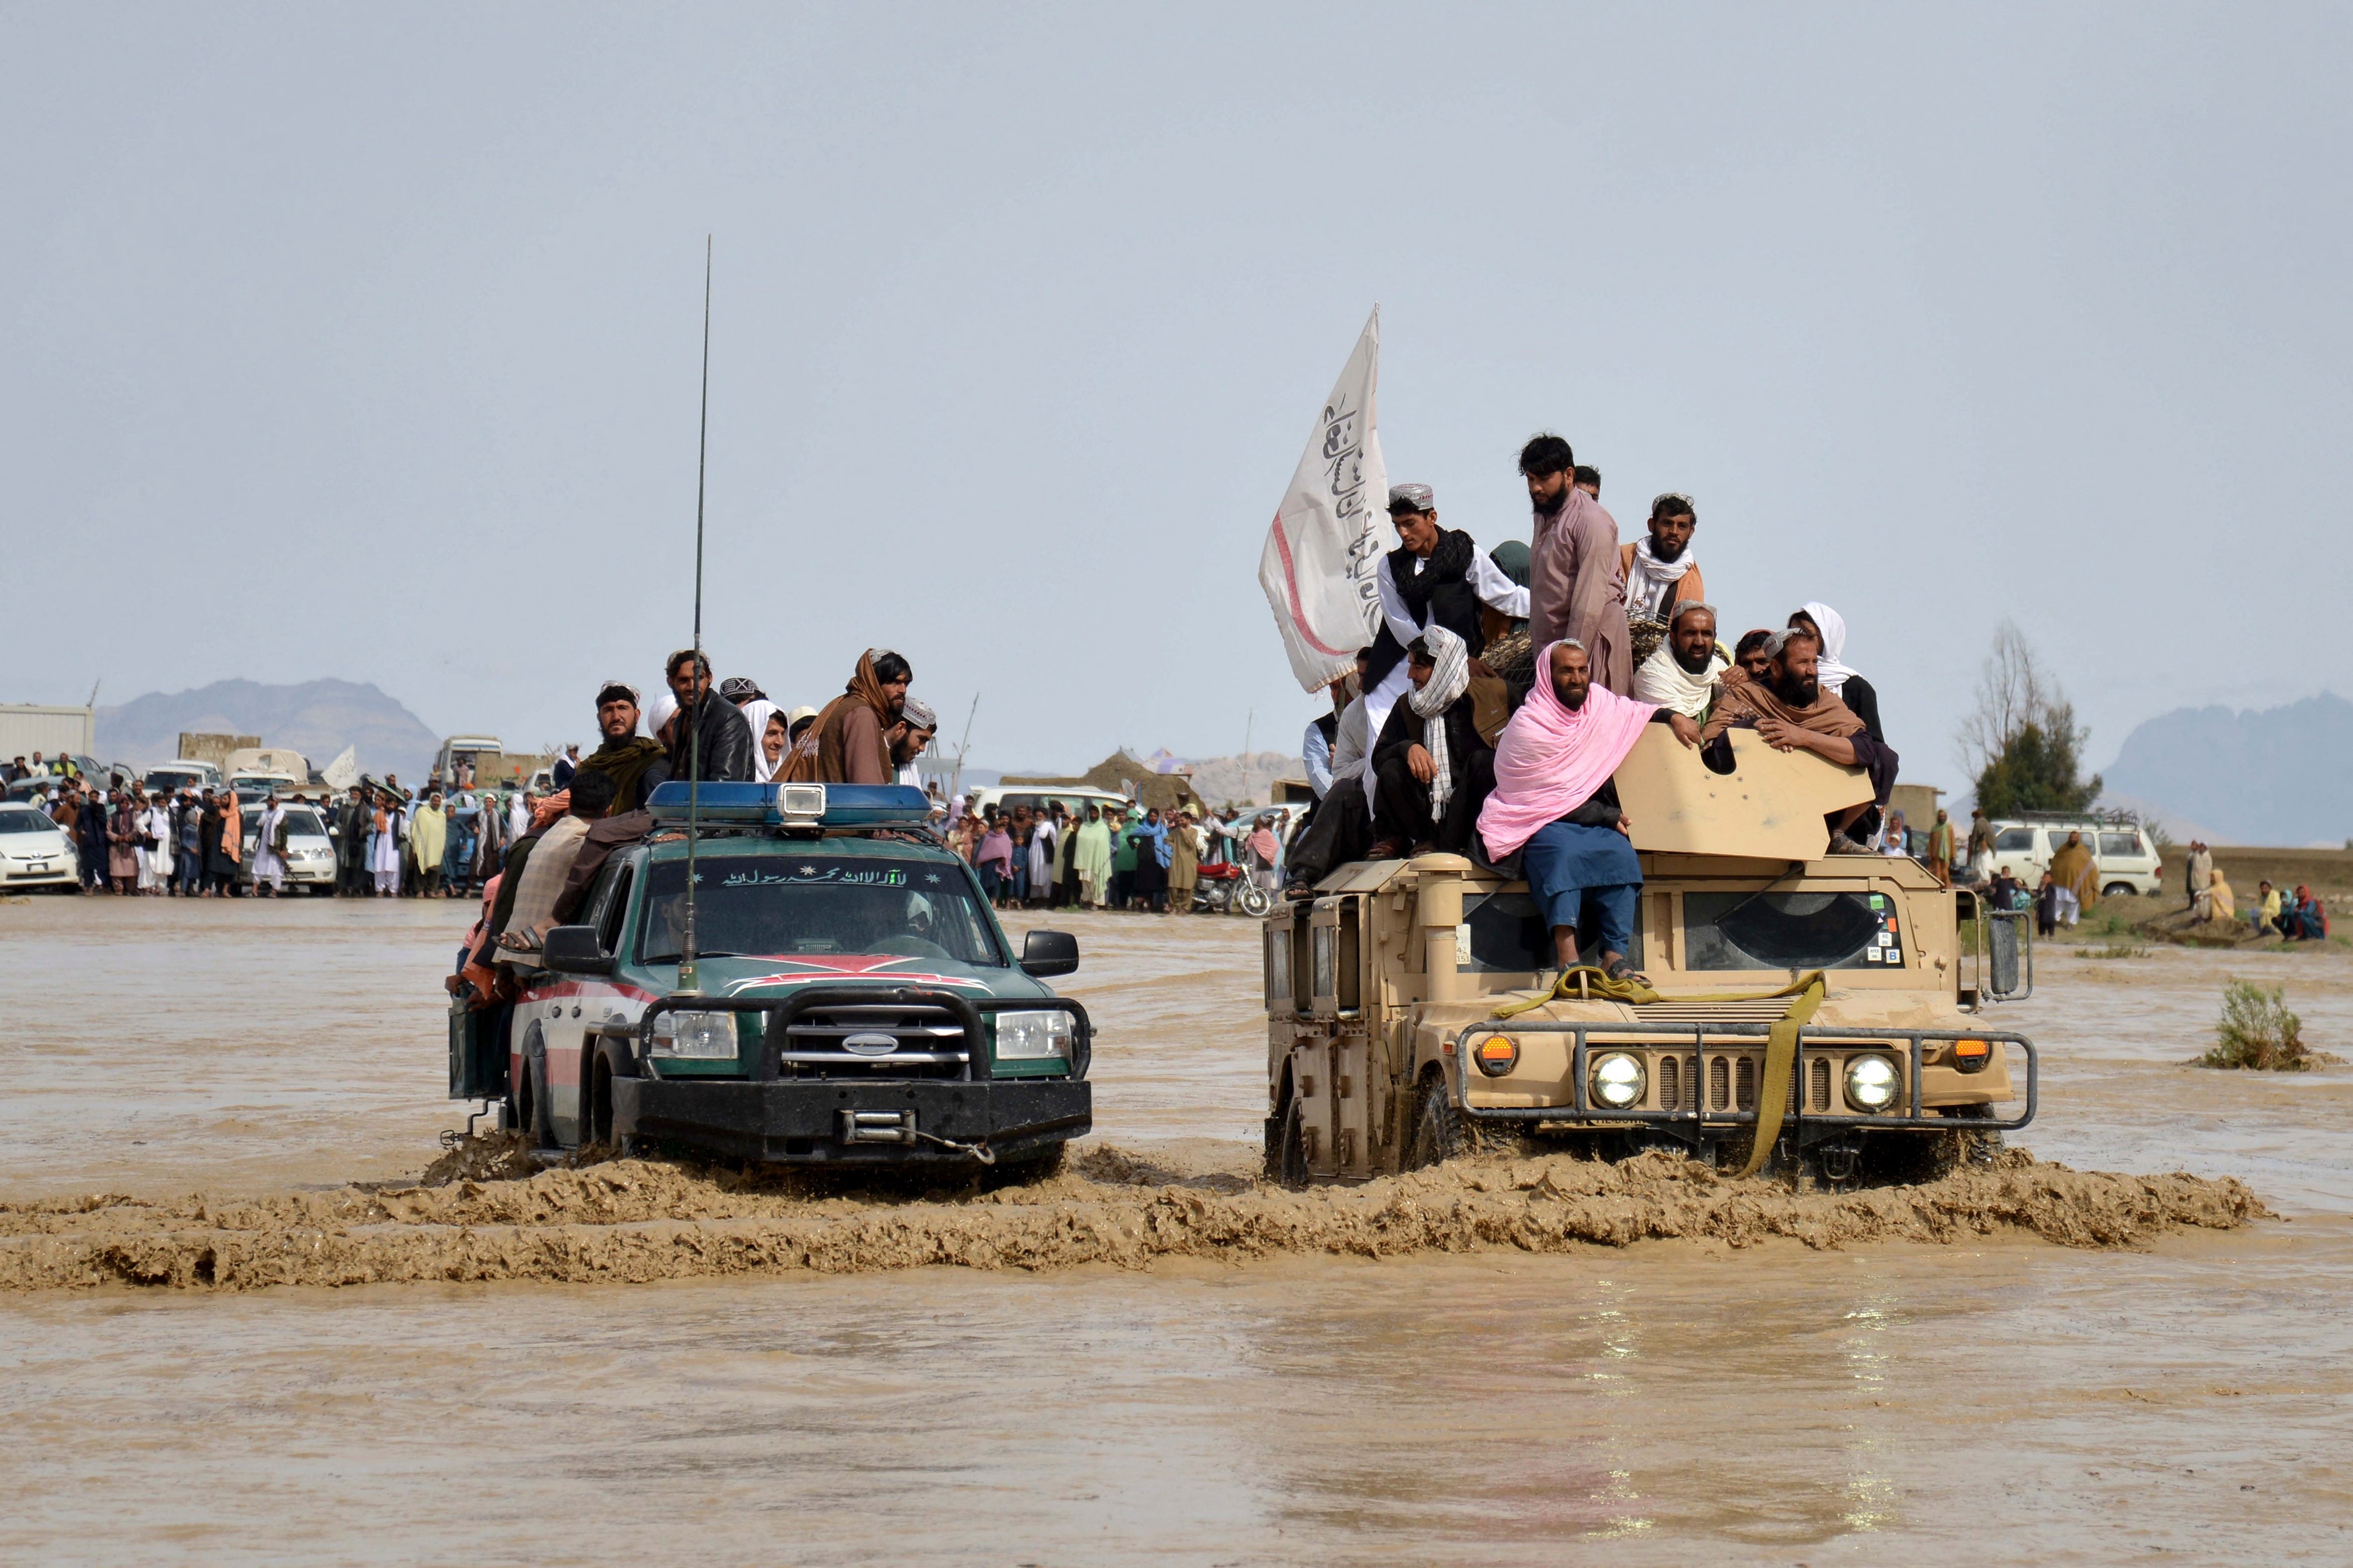 Afghan men sit atop military vehicles as they cross a flooded area in Kandahar province on Saturday